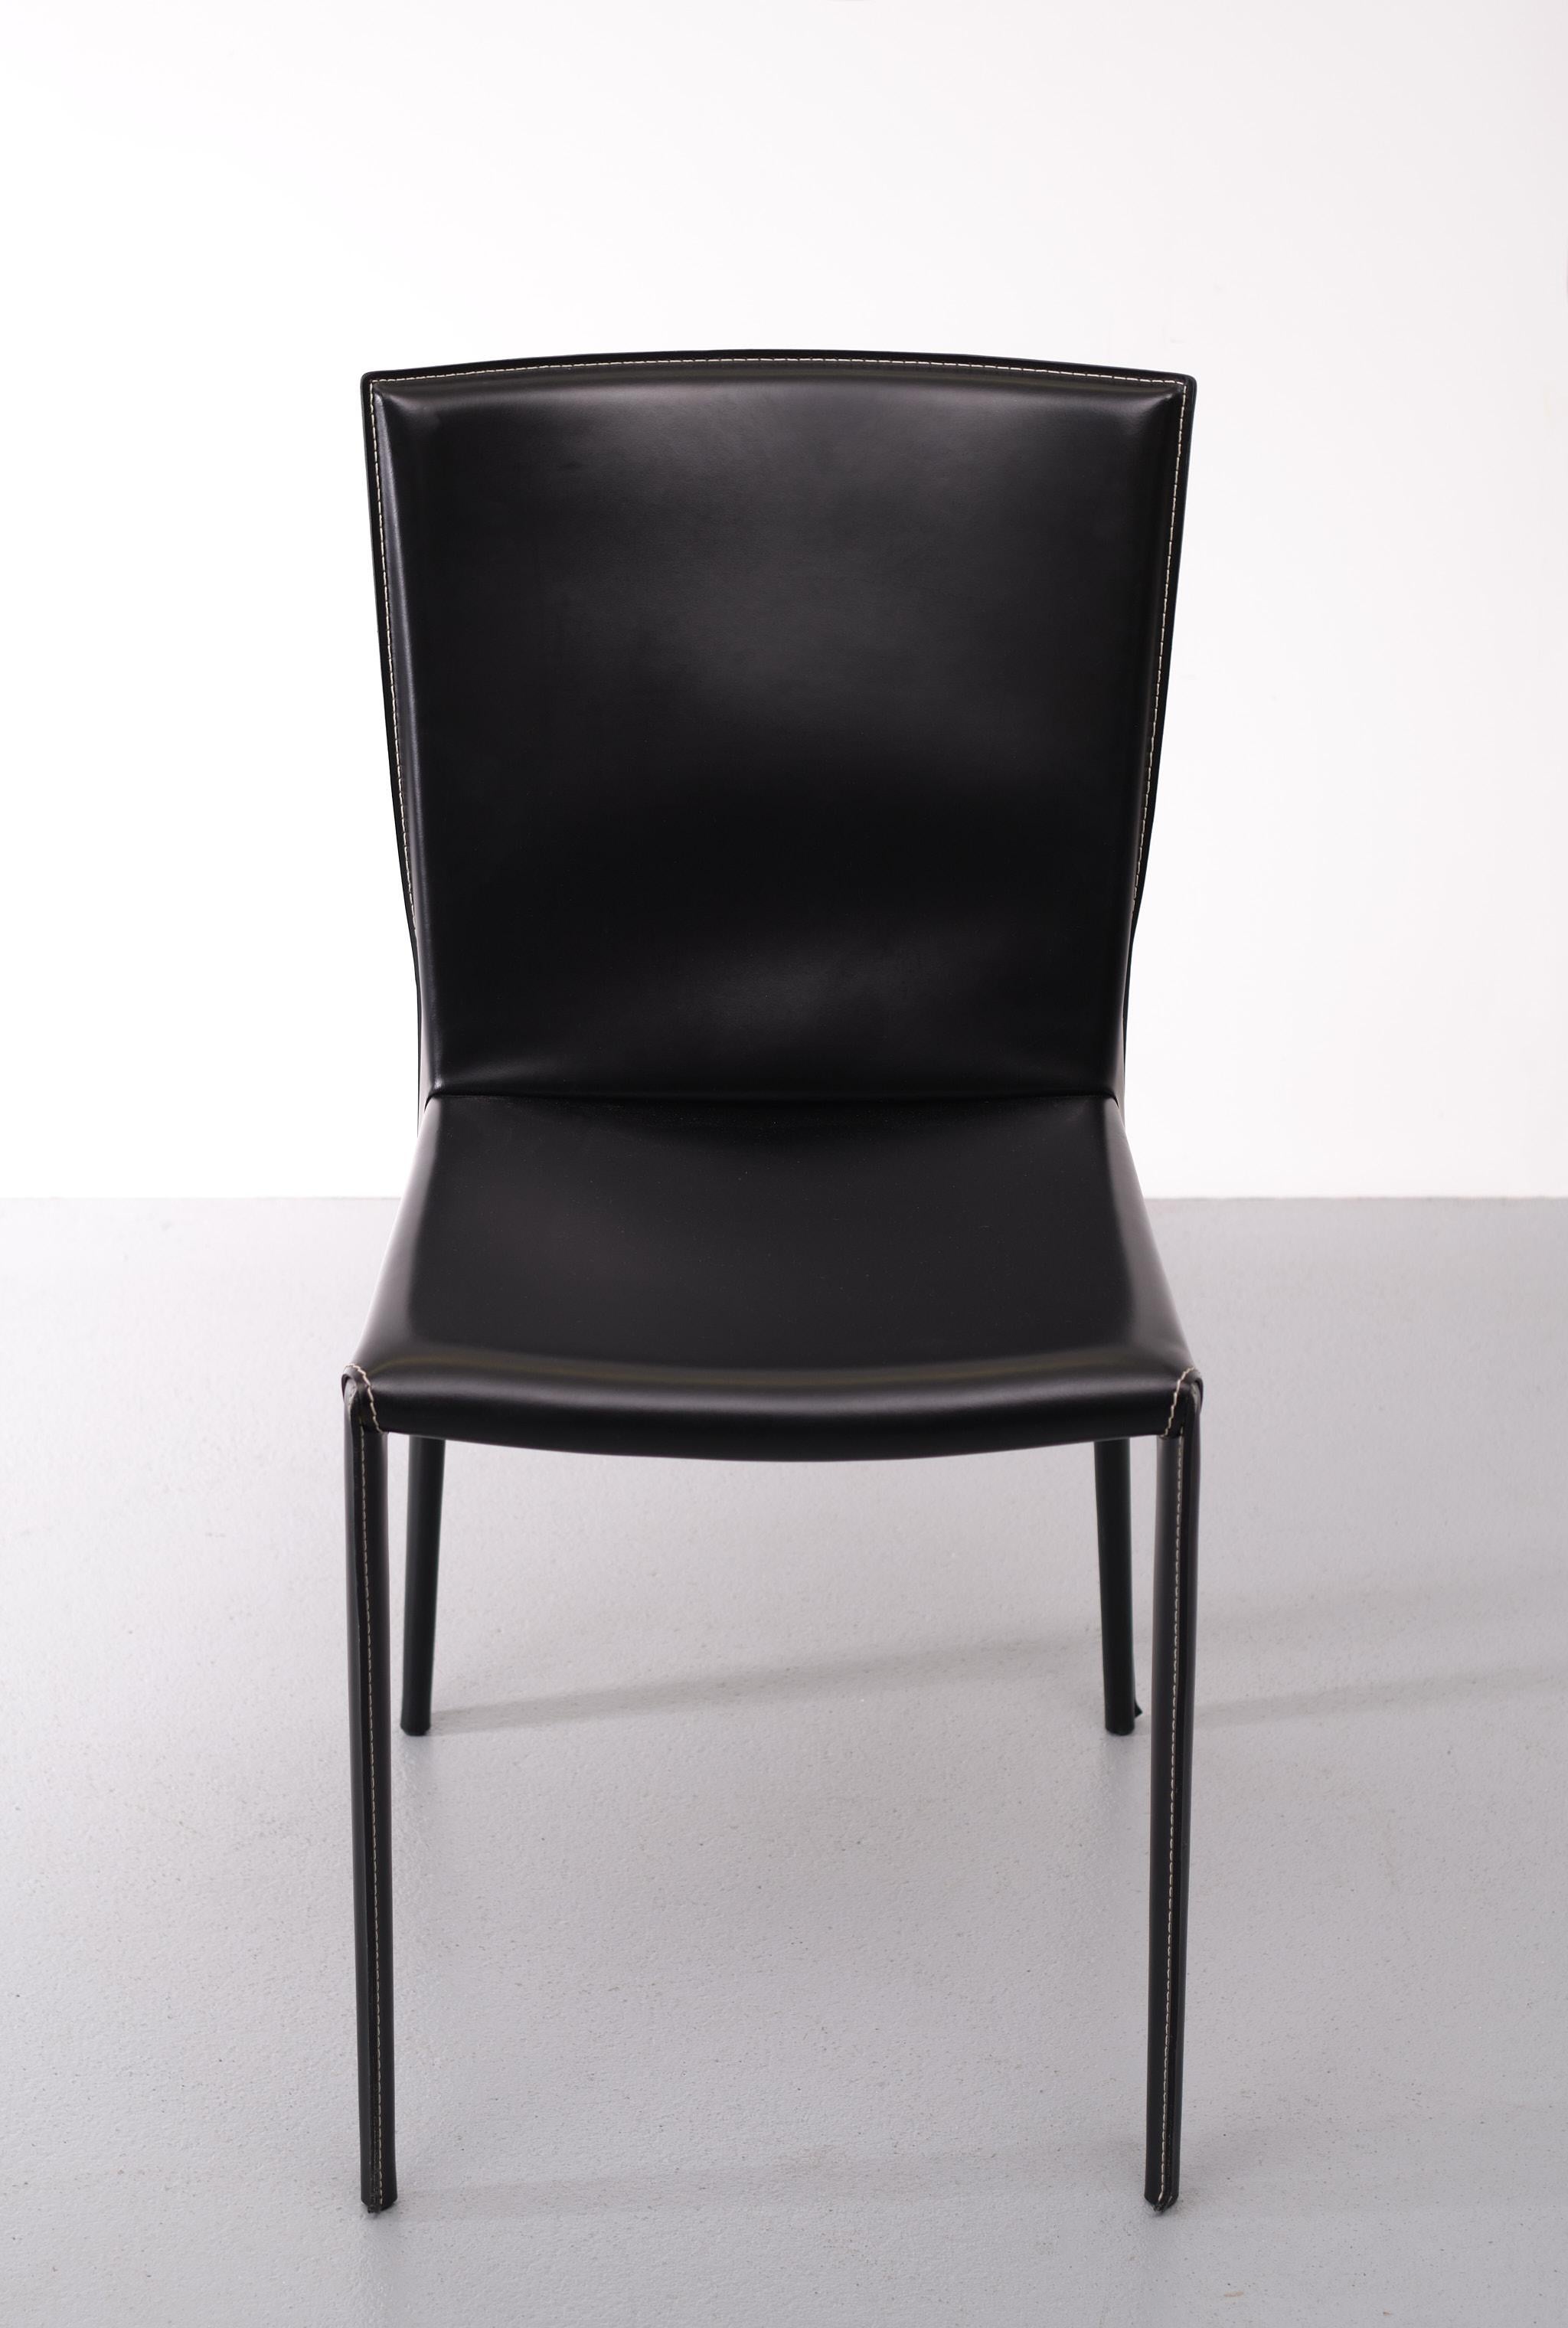 Modern Stich Leather Chair Model Beverly Cattelan, Italy For Sale